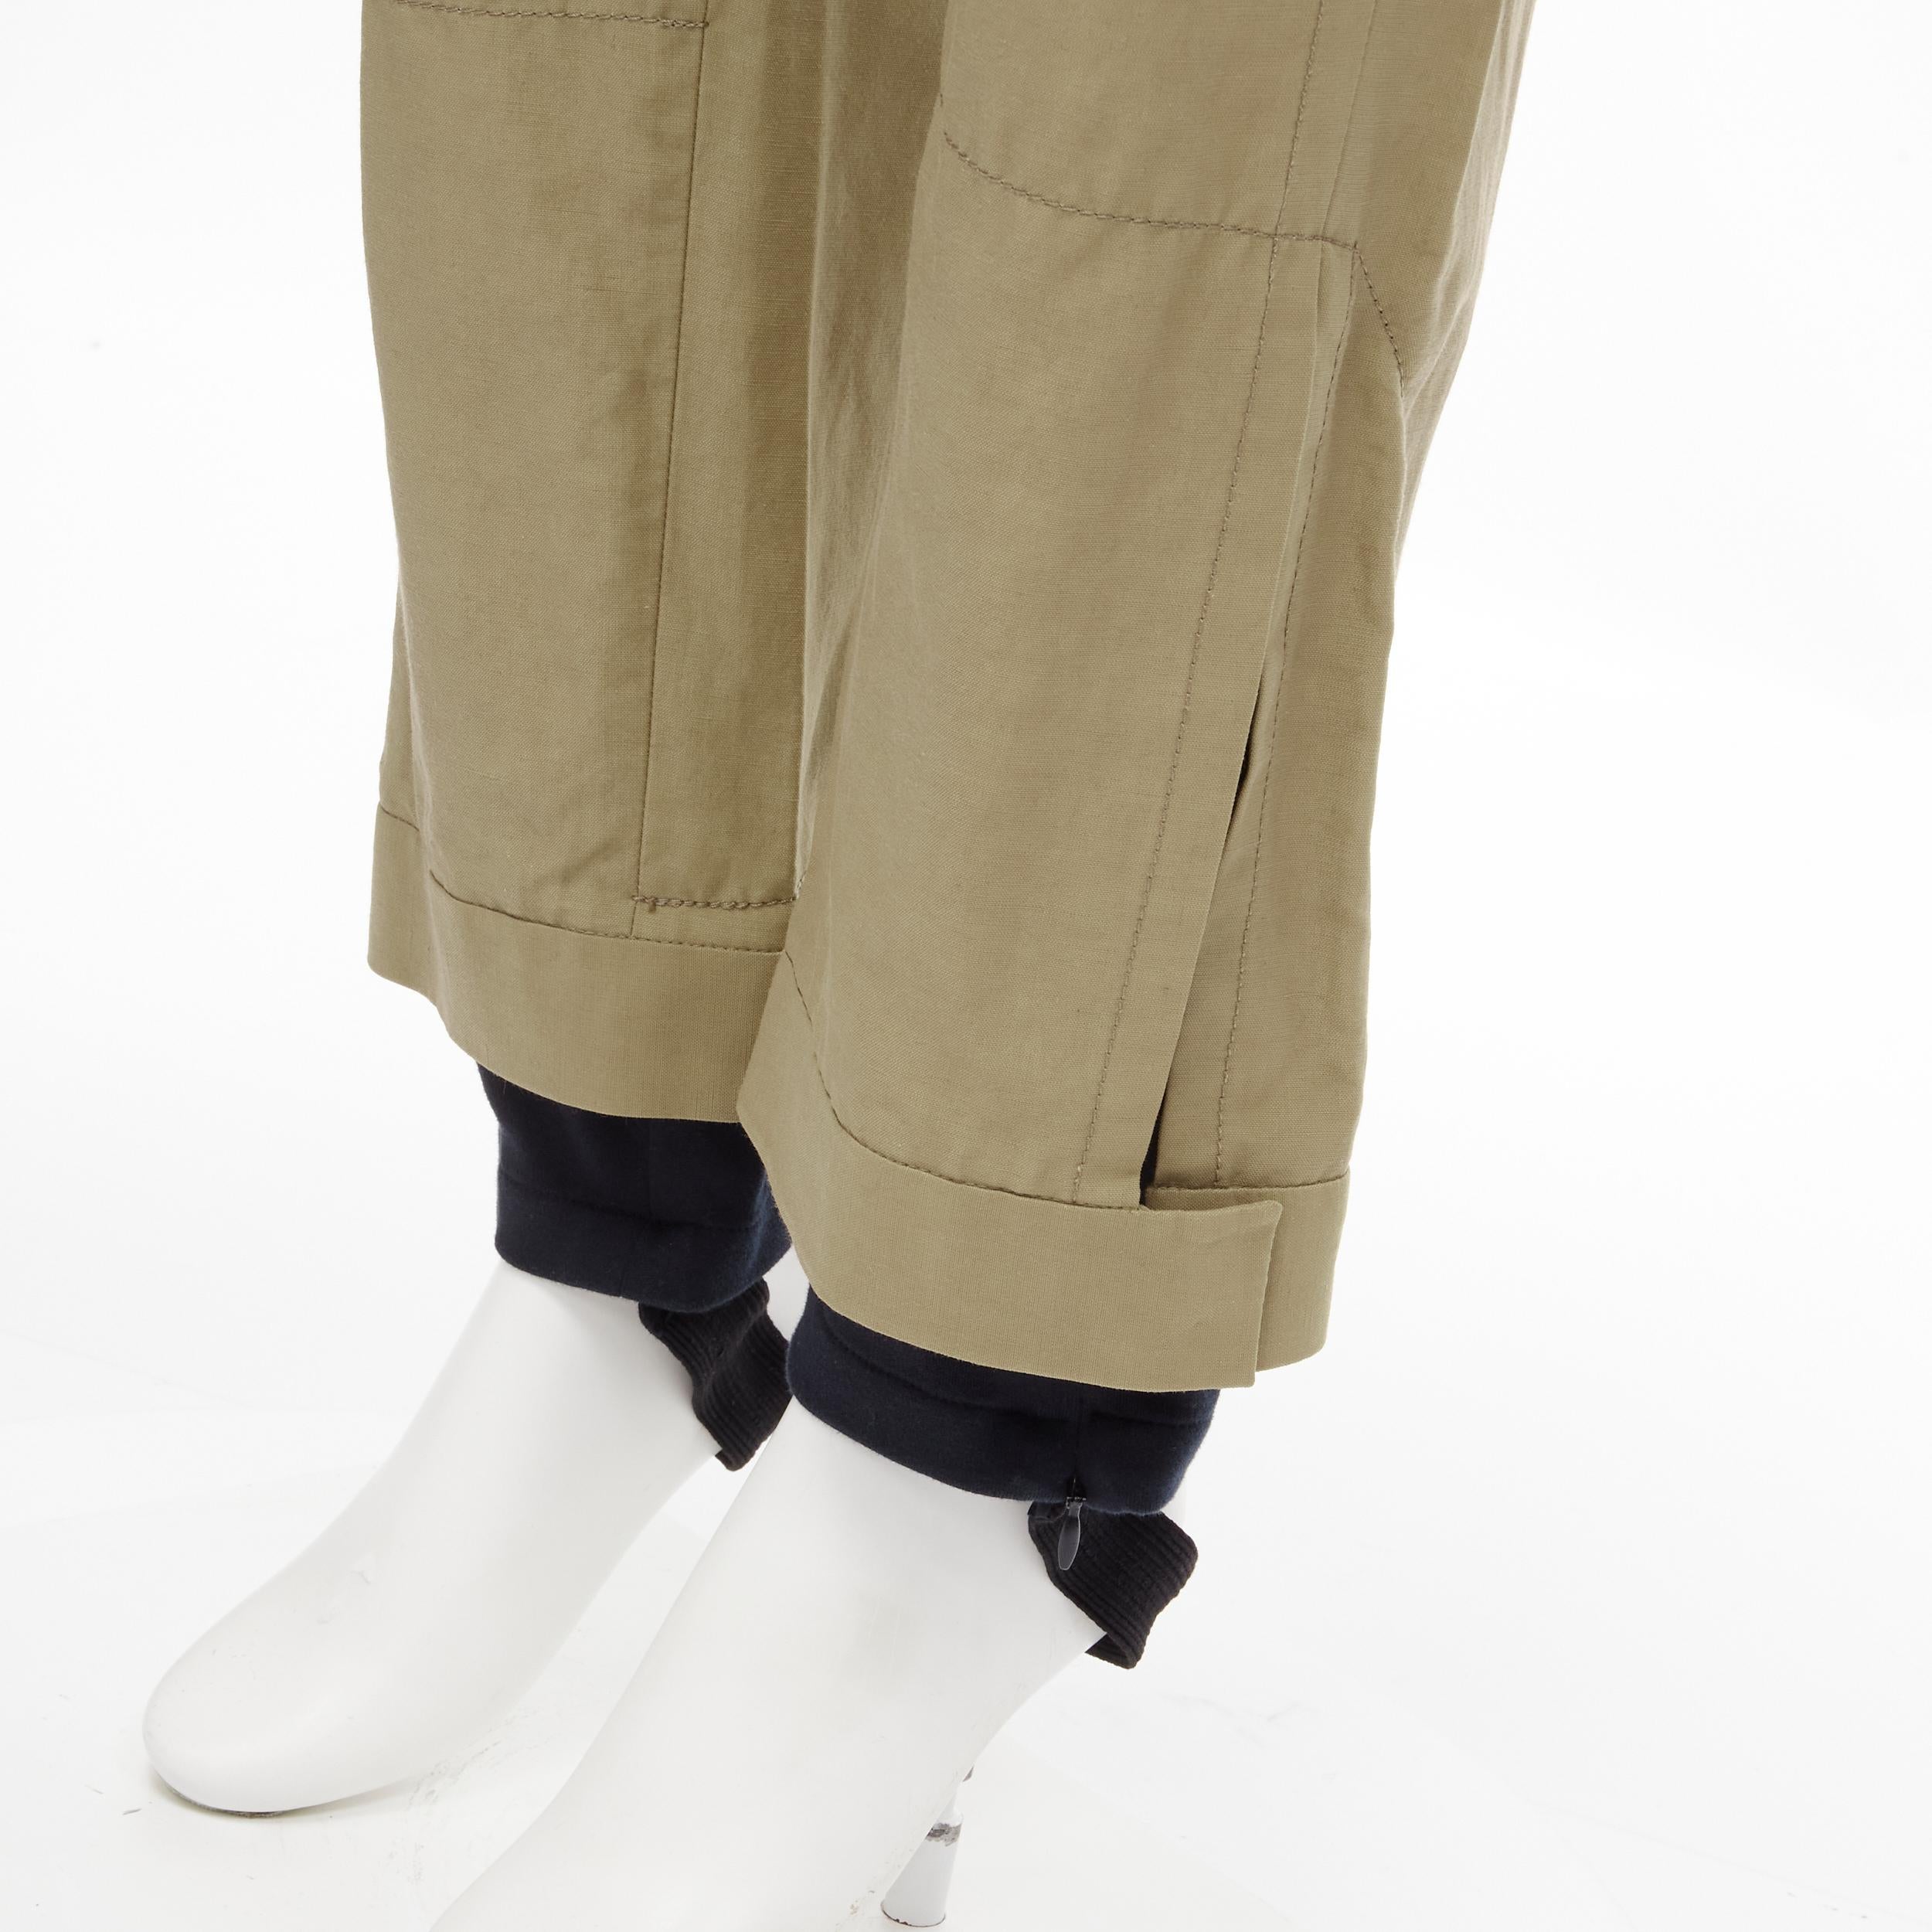 MARNI brown cotton layered hem stirrup jodphur pants IT42 S 
Reference: CELG/A00104 
Brand: Marni 
Collection: 2011 
Material: Cotton 
Color: Brown 
Pattern: Solid 
Closure: Zip 
Extra Detail: 4-pocket at front. Dropped crotch. Faux layered hem.